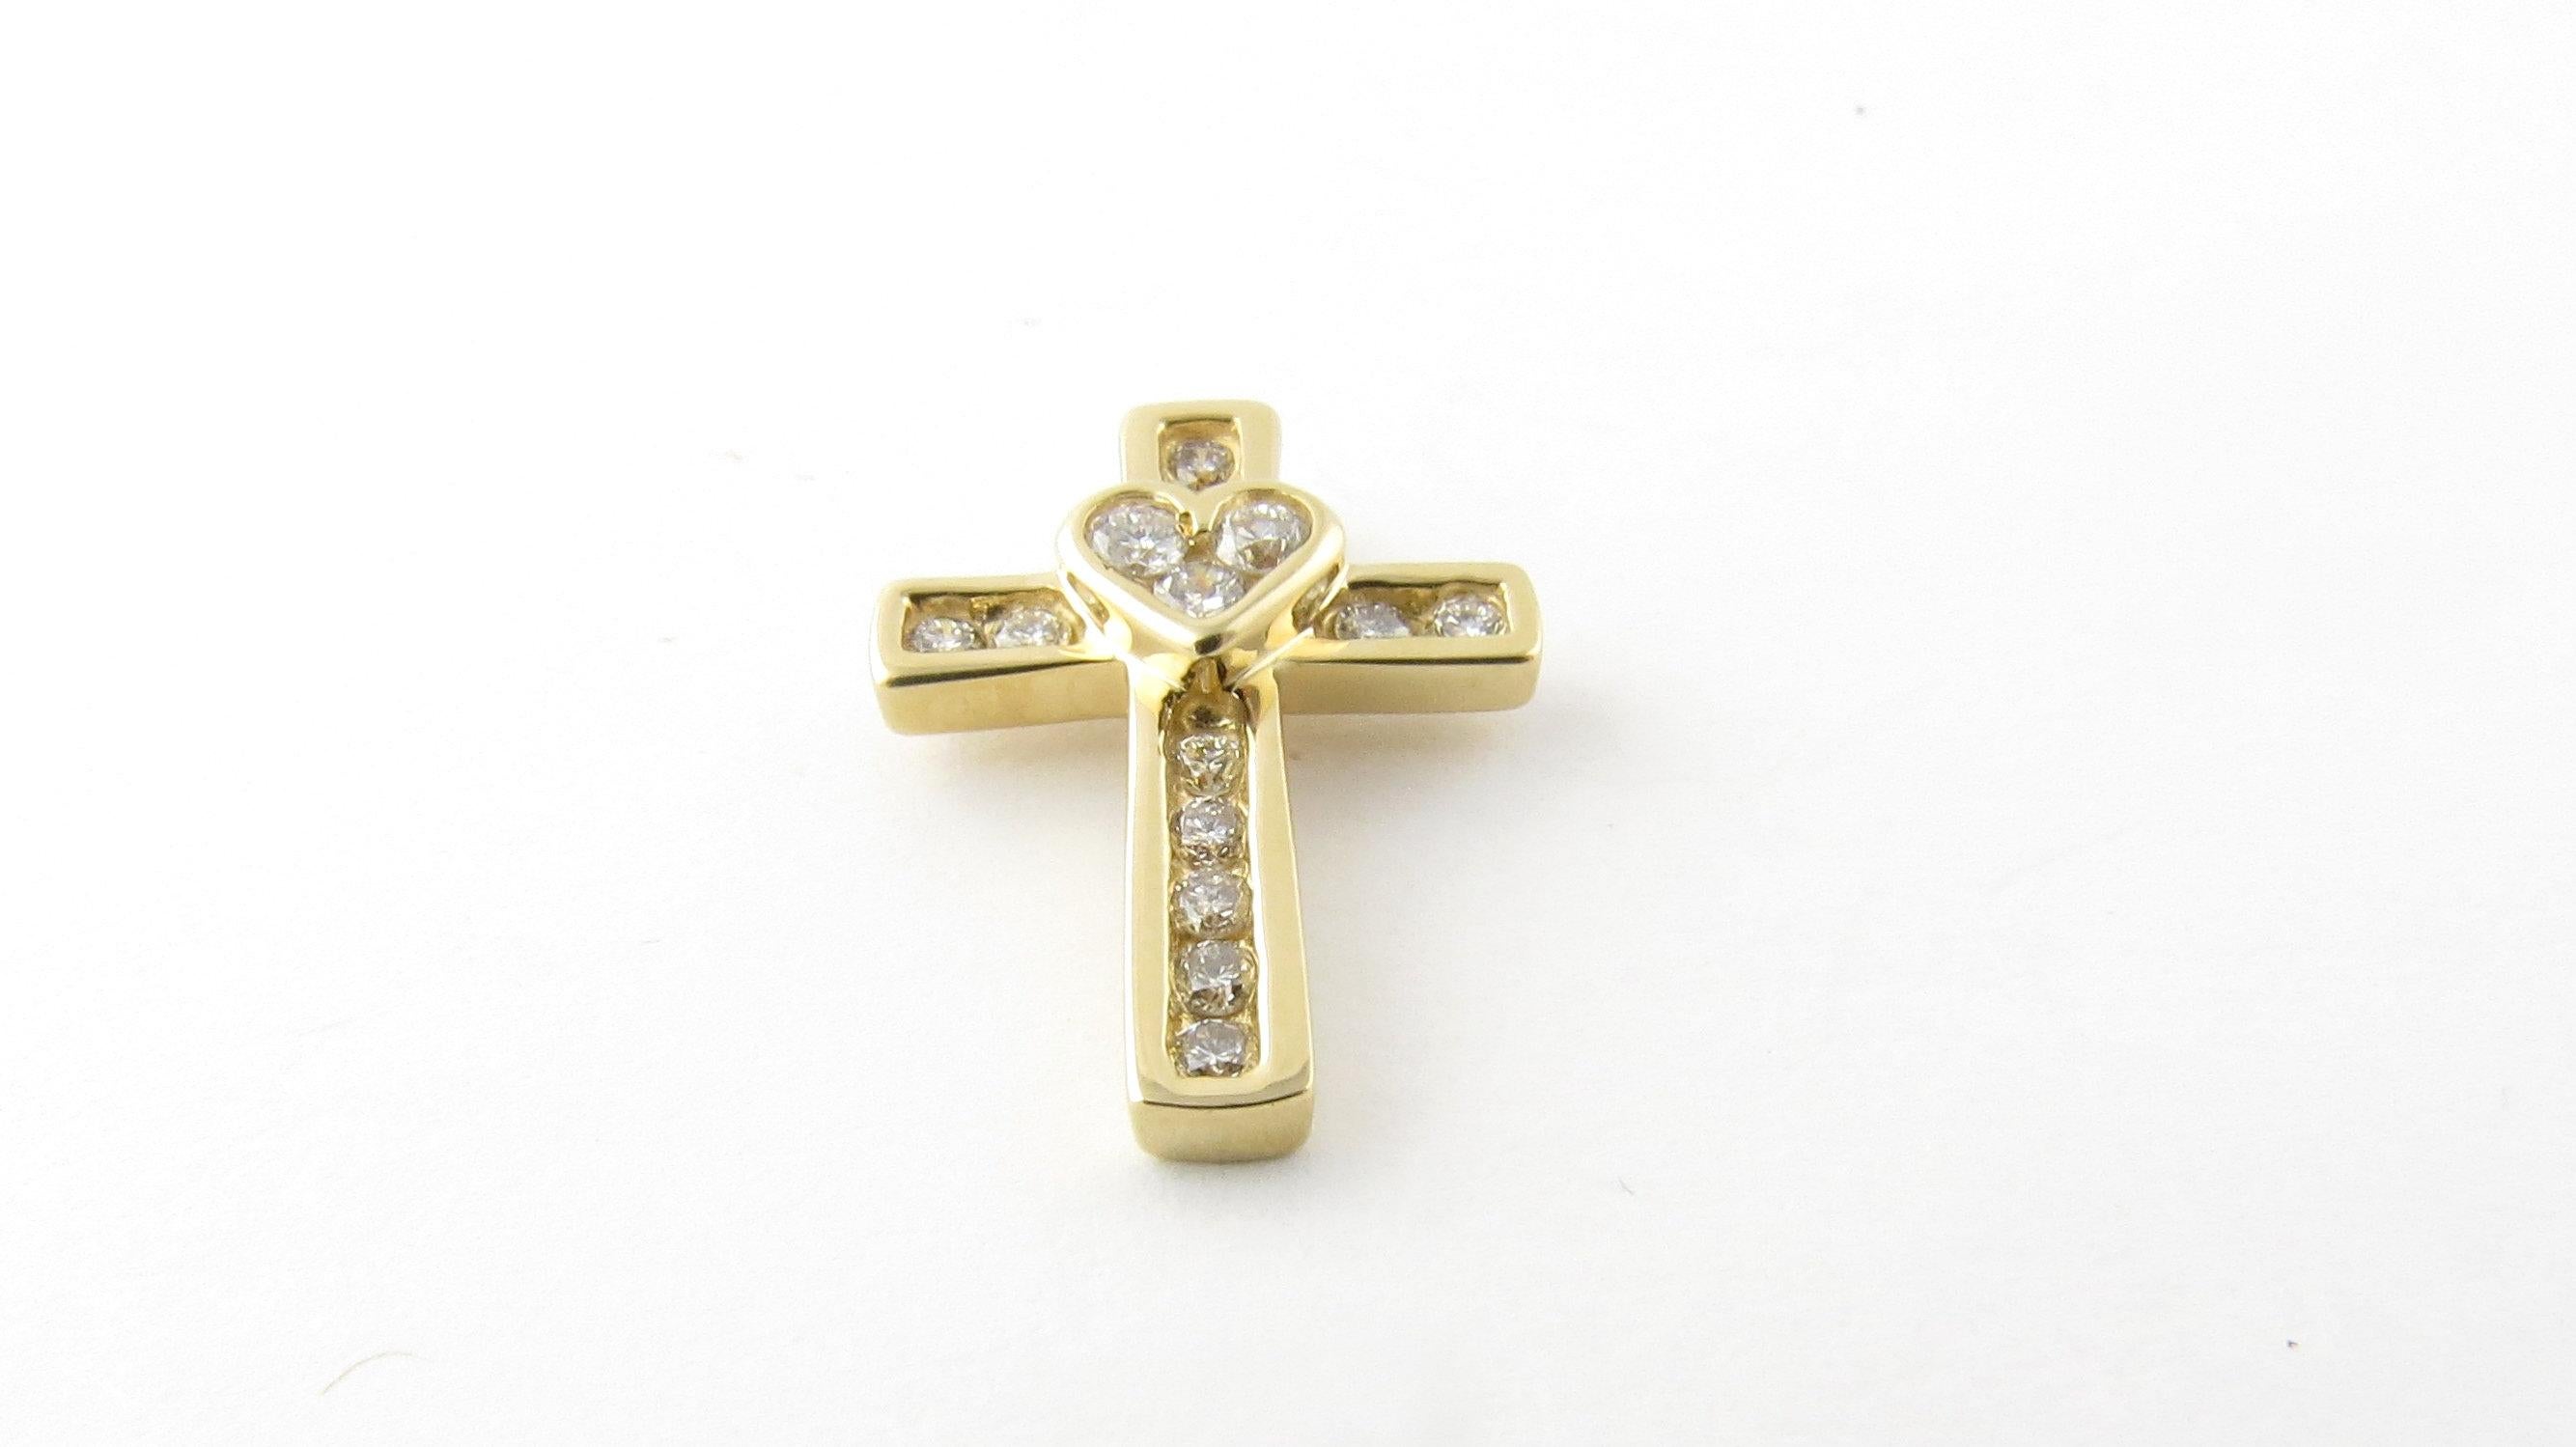 Vintage 14 Karat Yellow Gold Diamond Cross Pendant
This sparkling cross pendant with a lovely heart in its center is decorated with 14 round brilliant cut diamonds set in 14K yellow gold. 
Approximate total diamond weight: .30 ct. 
Diamond color: